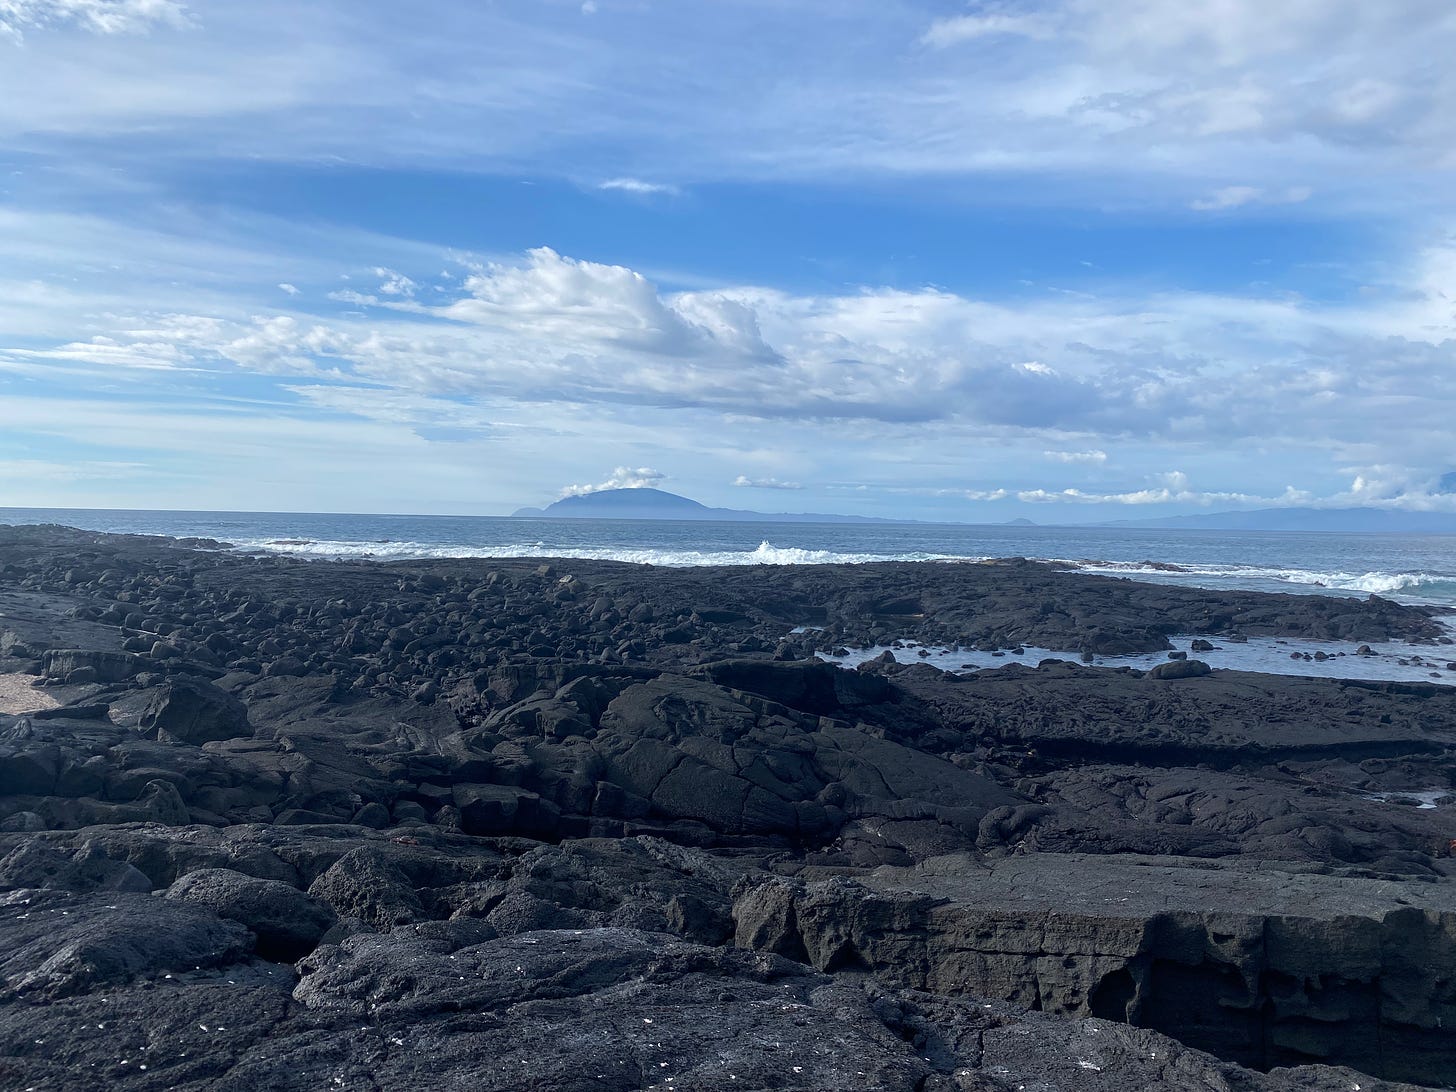 View of a landscape of black lava rocks stretching toward the ocean. A volcano on a distant island is visible in the distance.